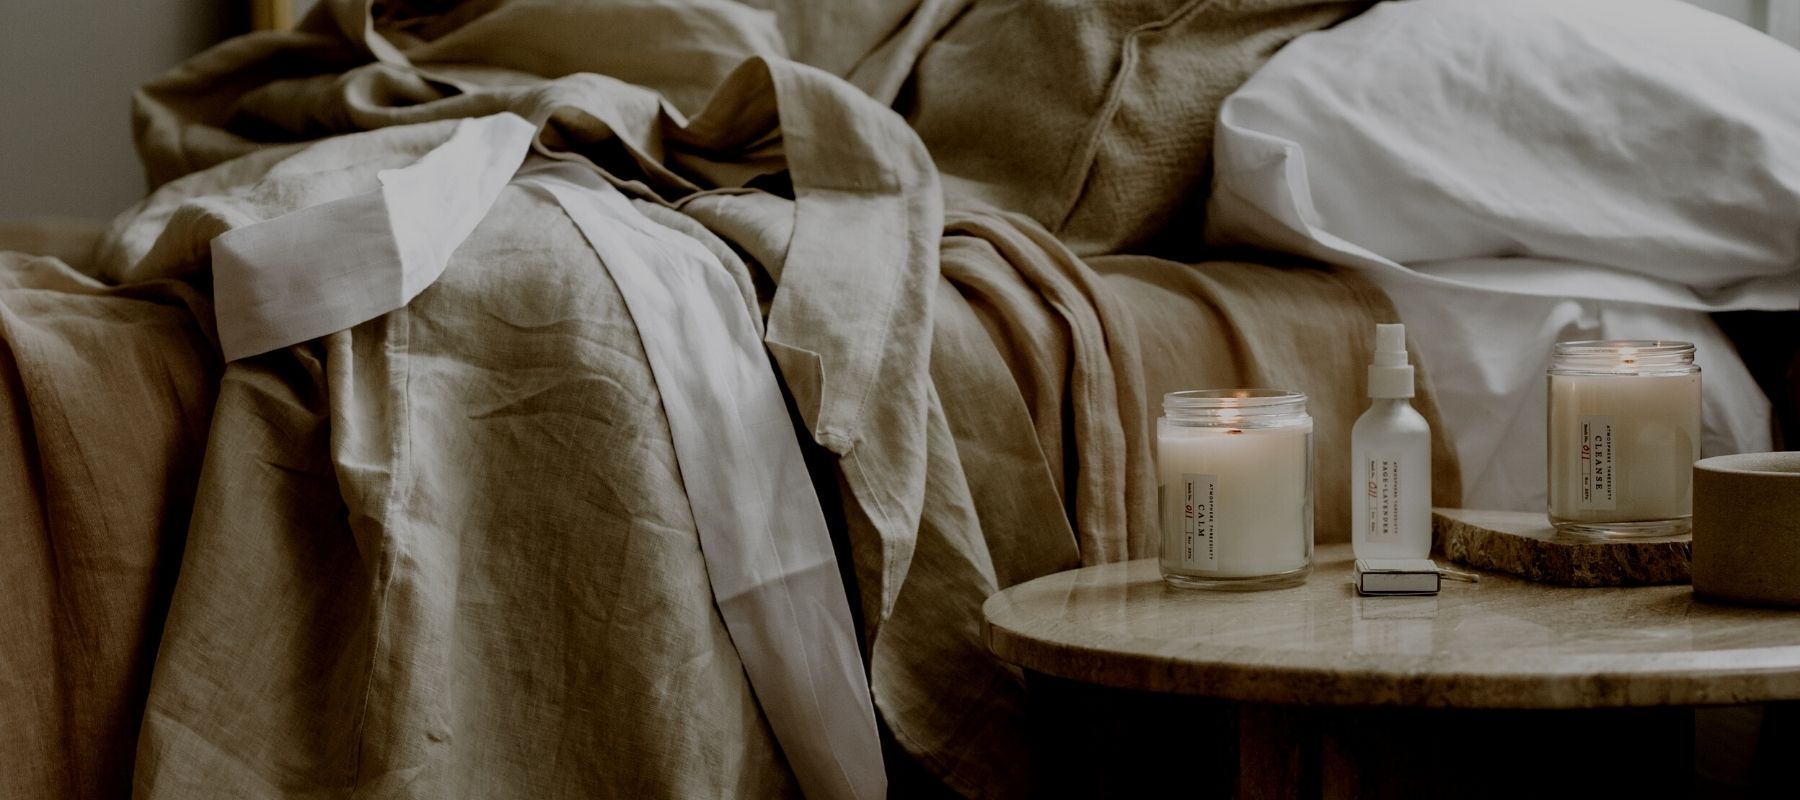 An Atmosphere Threesixty Aromatherapy Candle and Aura Mist are sitting on a bedside table. The bed is unmade.